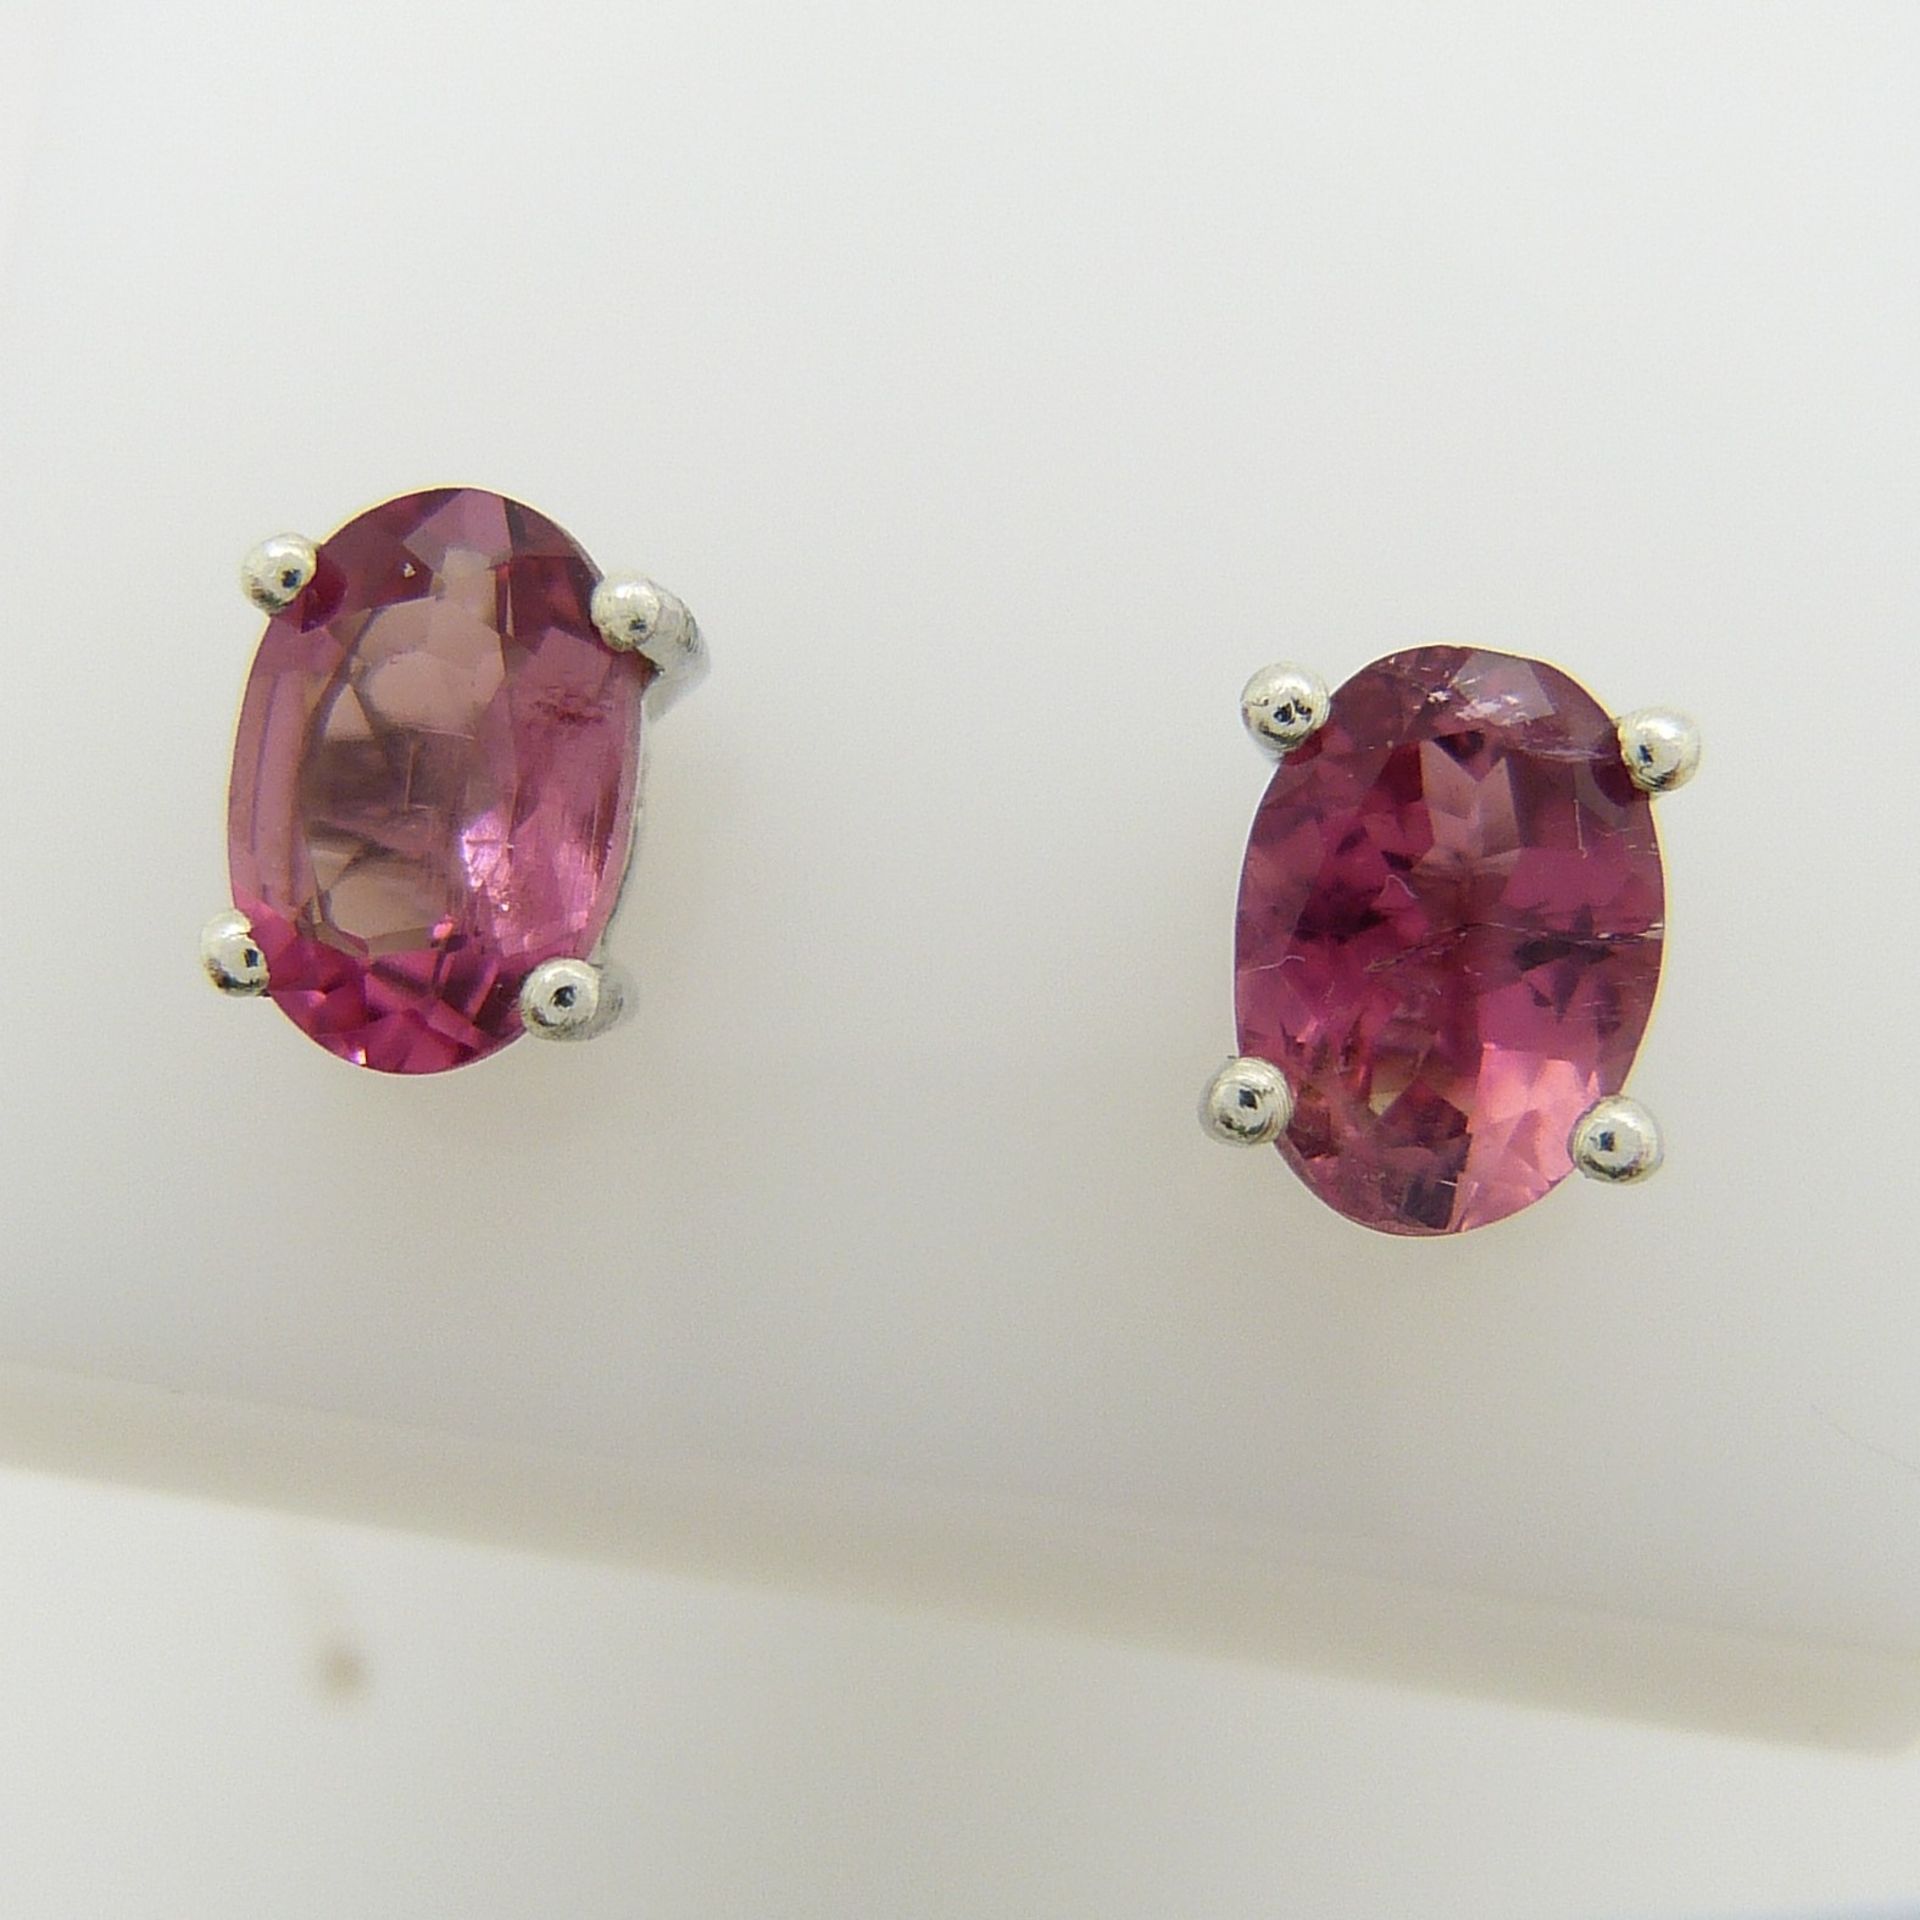 A pair of silver ear studs set with pink tourmalines, 1.30 carats (approx)